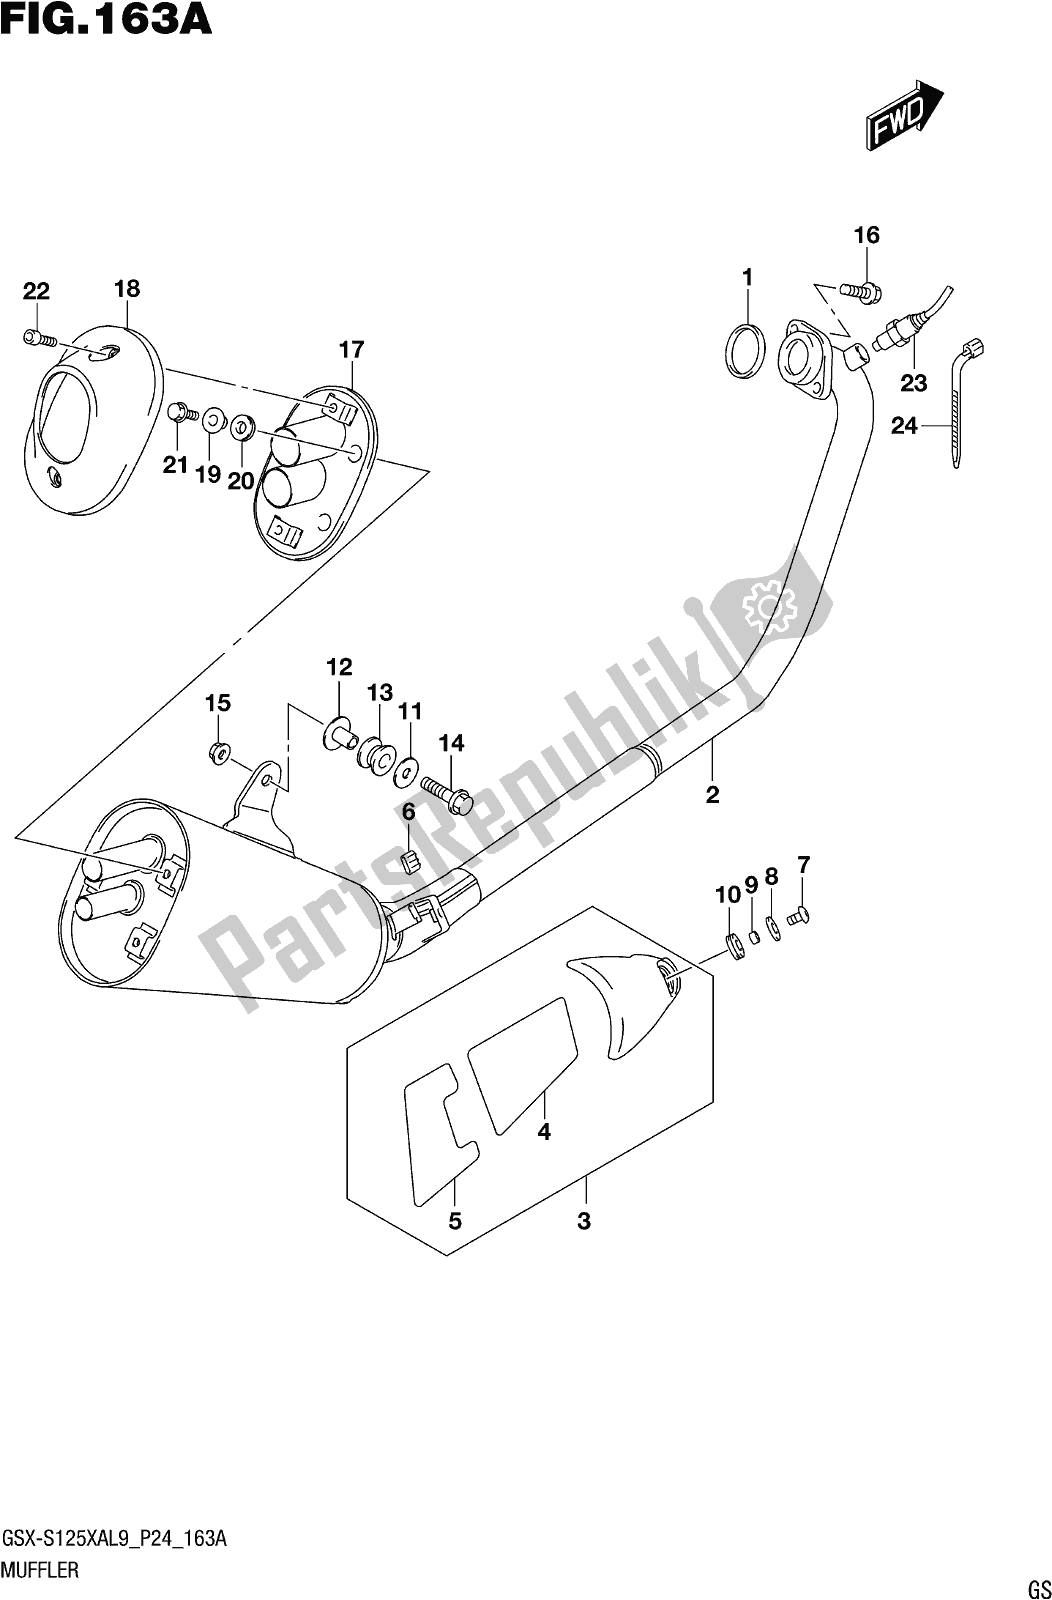 All parts for the Fig. 163a Muffler of the Suzuki Gsx-s 125 XA 2019